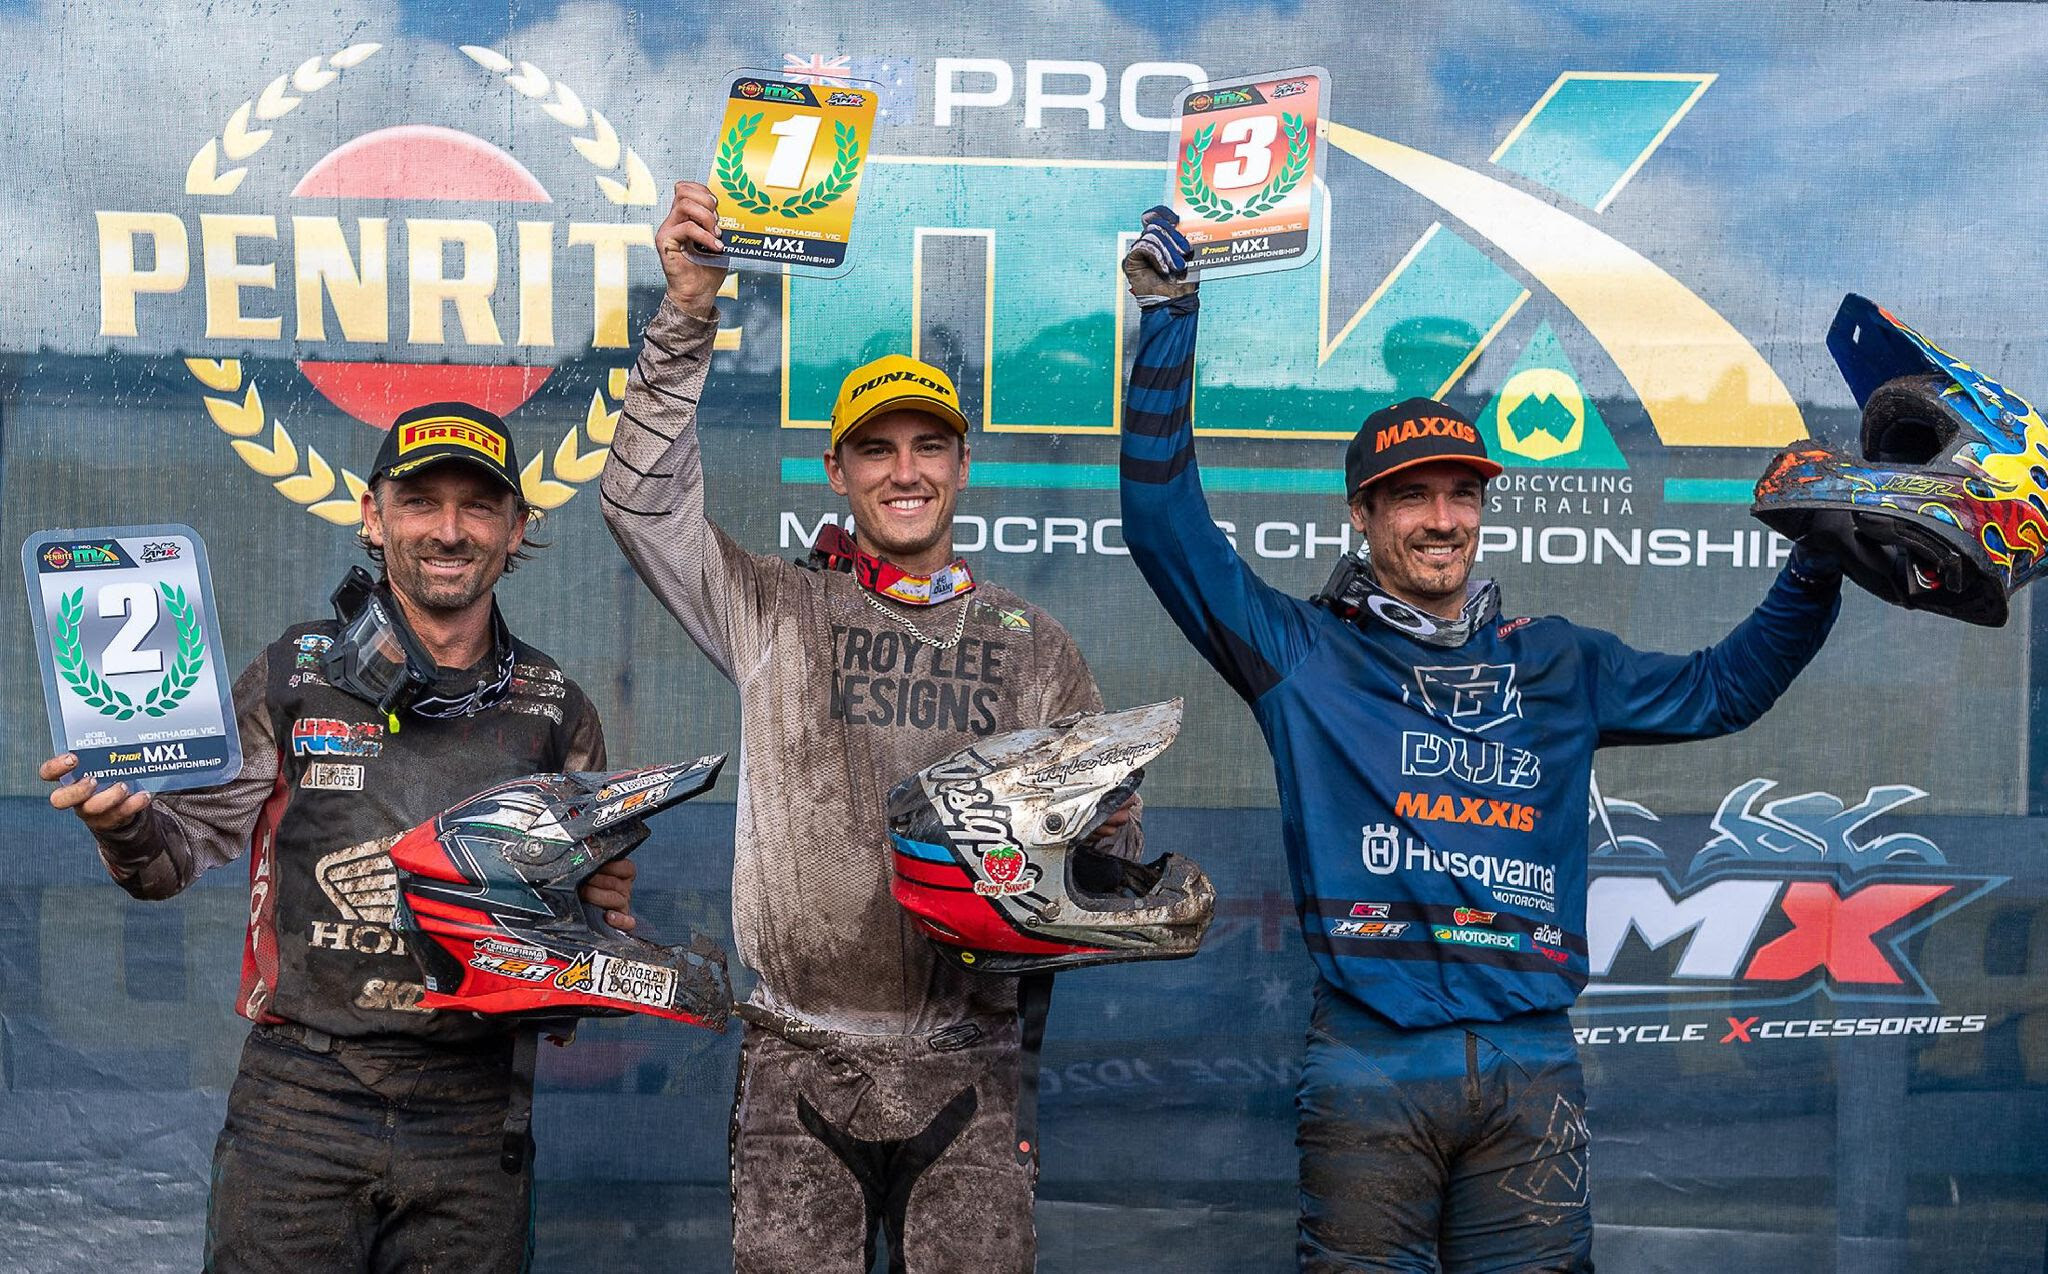 Duffy (MX1) and Webster (MX2) Claim Wins at Penrite ProMX Round 1 - Australian MX